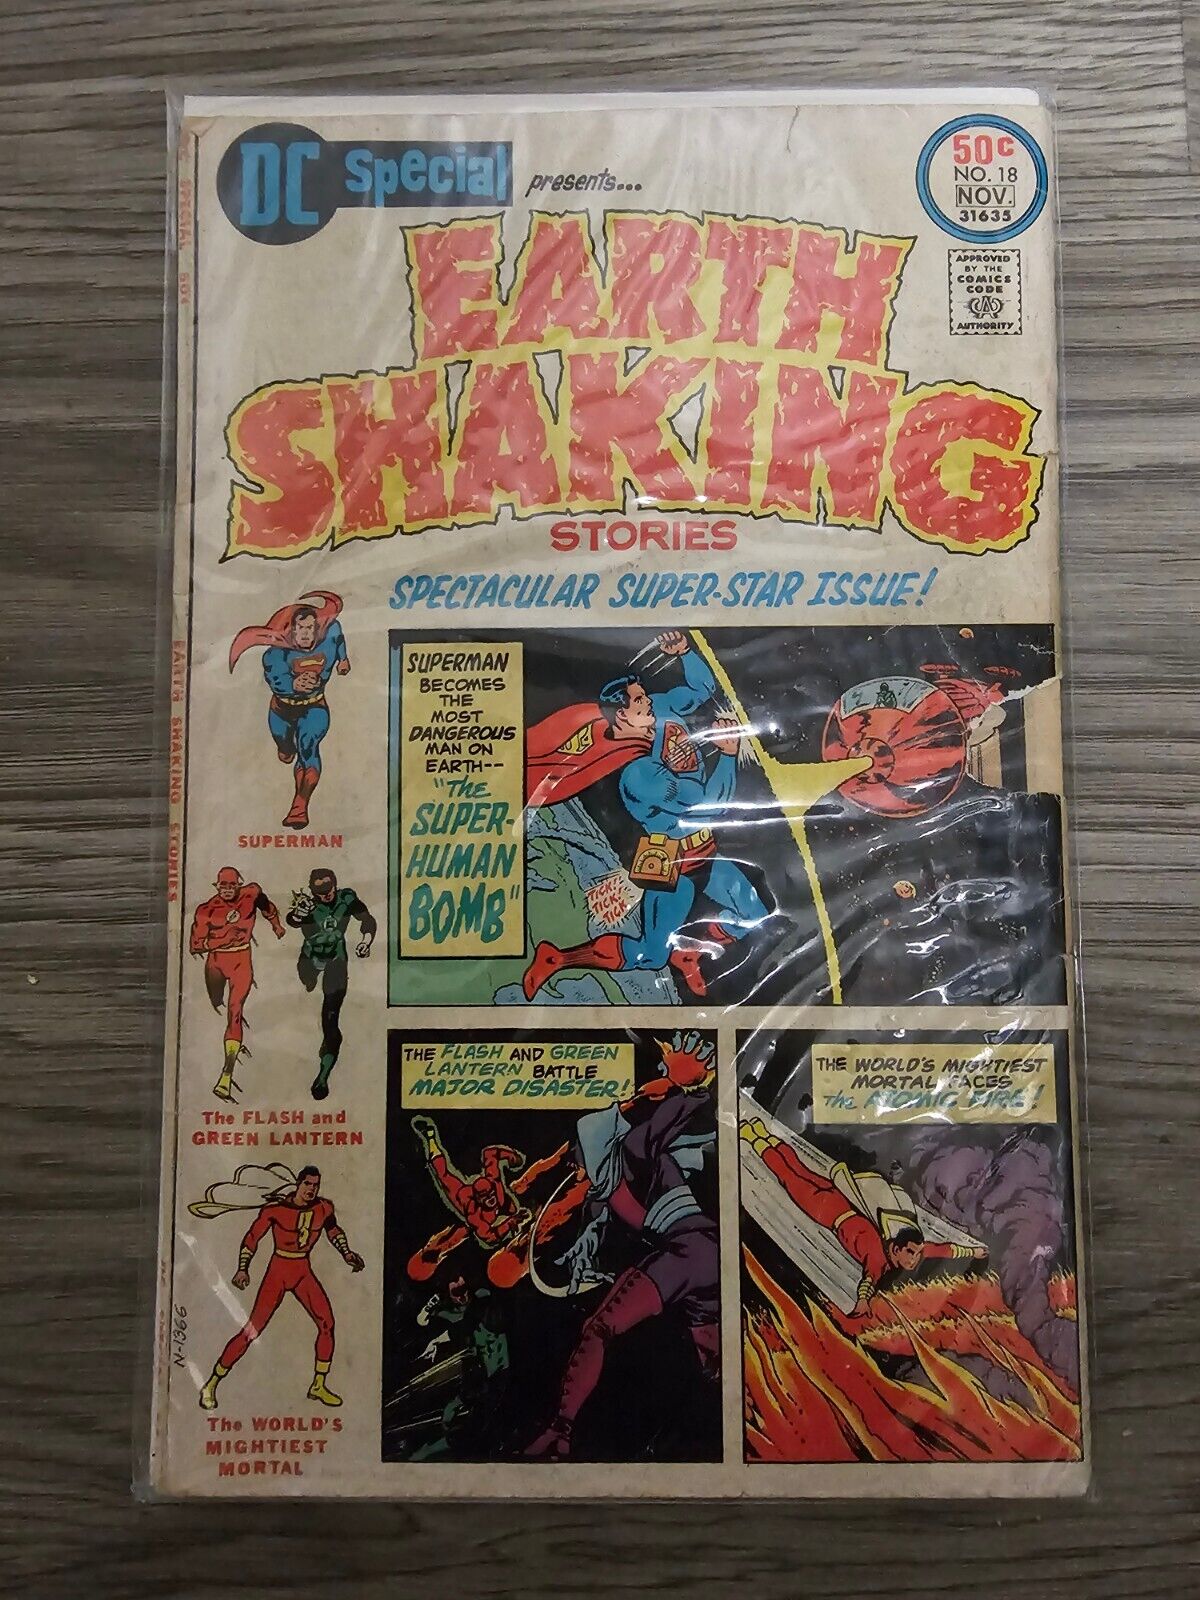 DC Special Presents Earth Shaking Stories #18 (1975) Vintage DC Comics VG